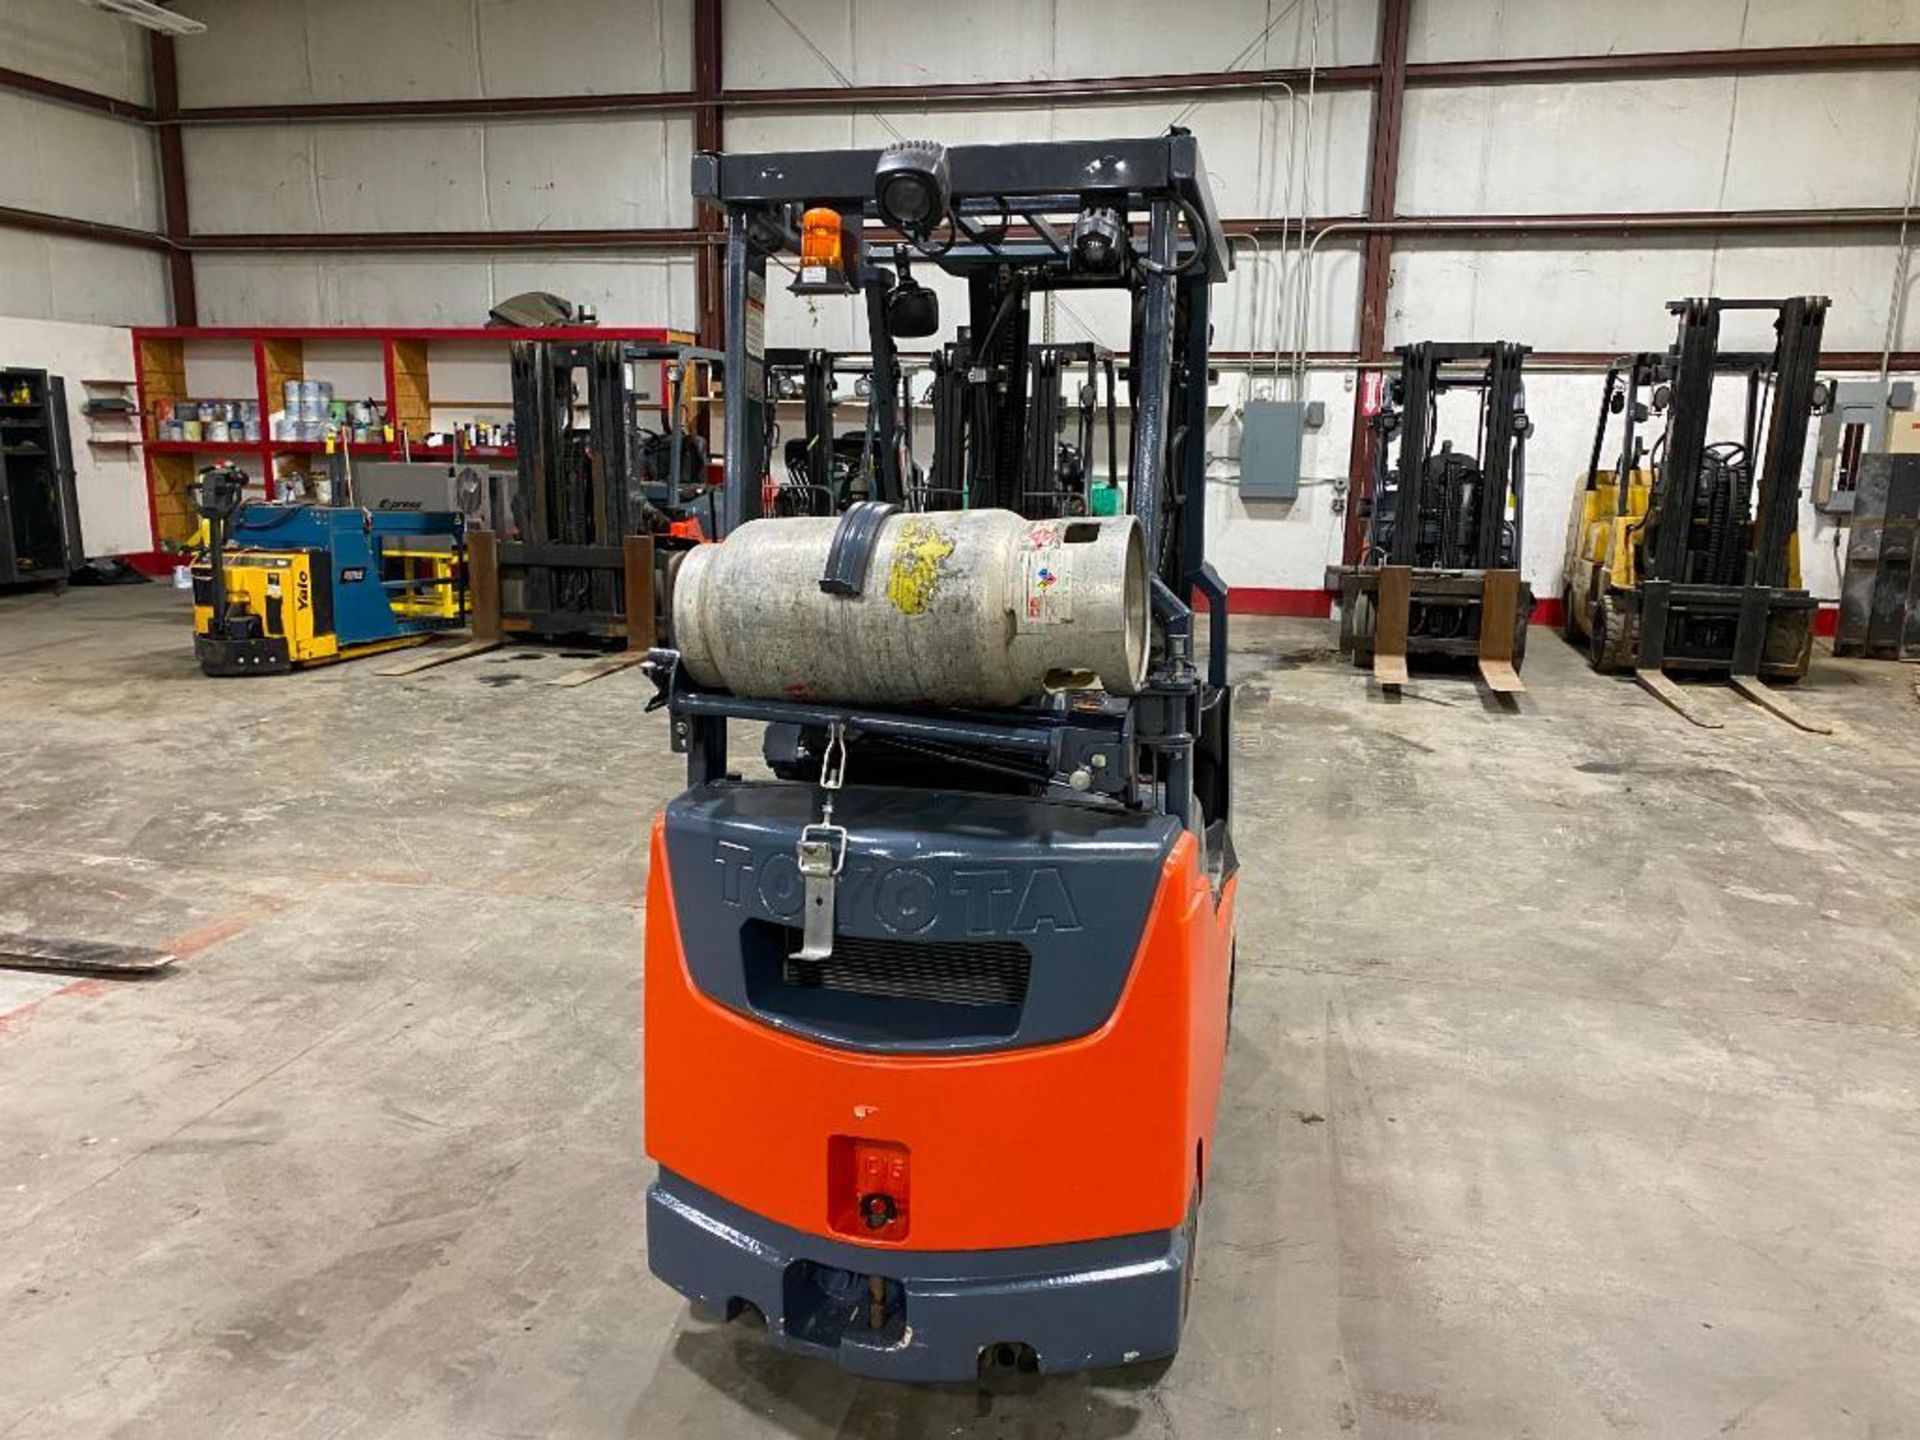 2018 Toyota 3,000-LB. Capacity Forklift, Model 8FGCU15, S/N 39697, LPG, Non-Marking Cushion Tires, 3 - Image 4 of 5